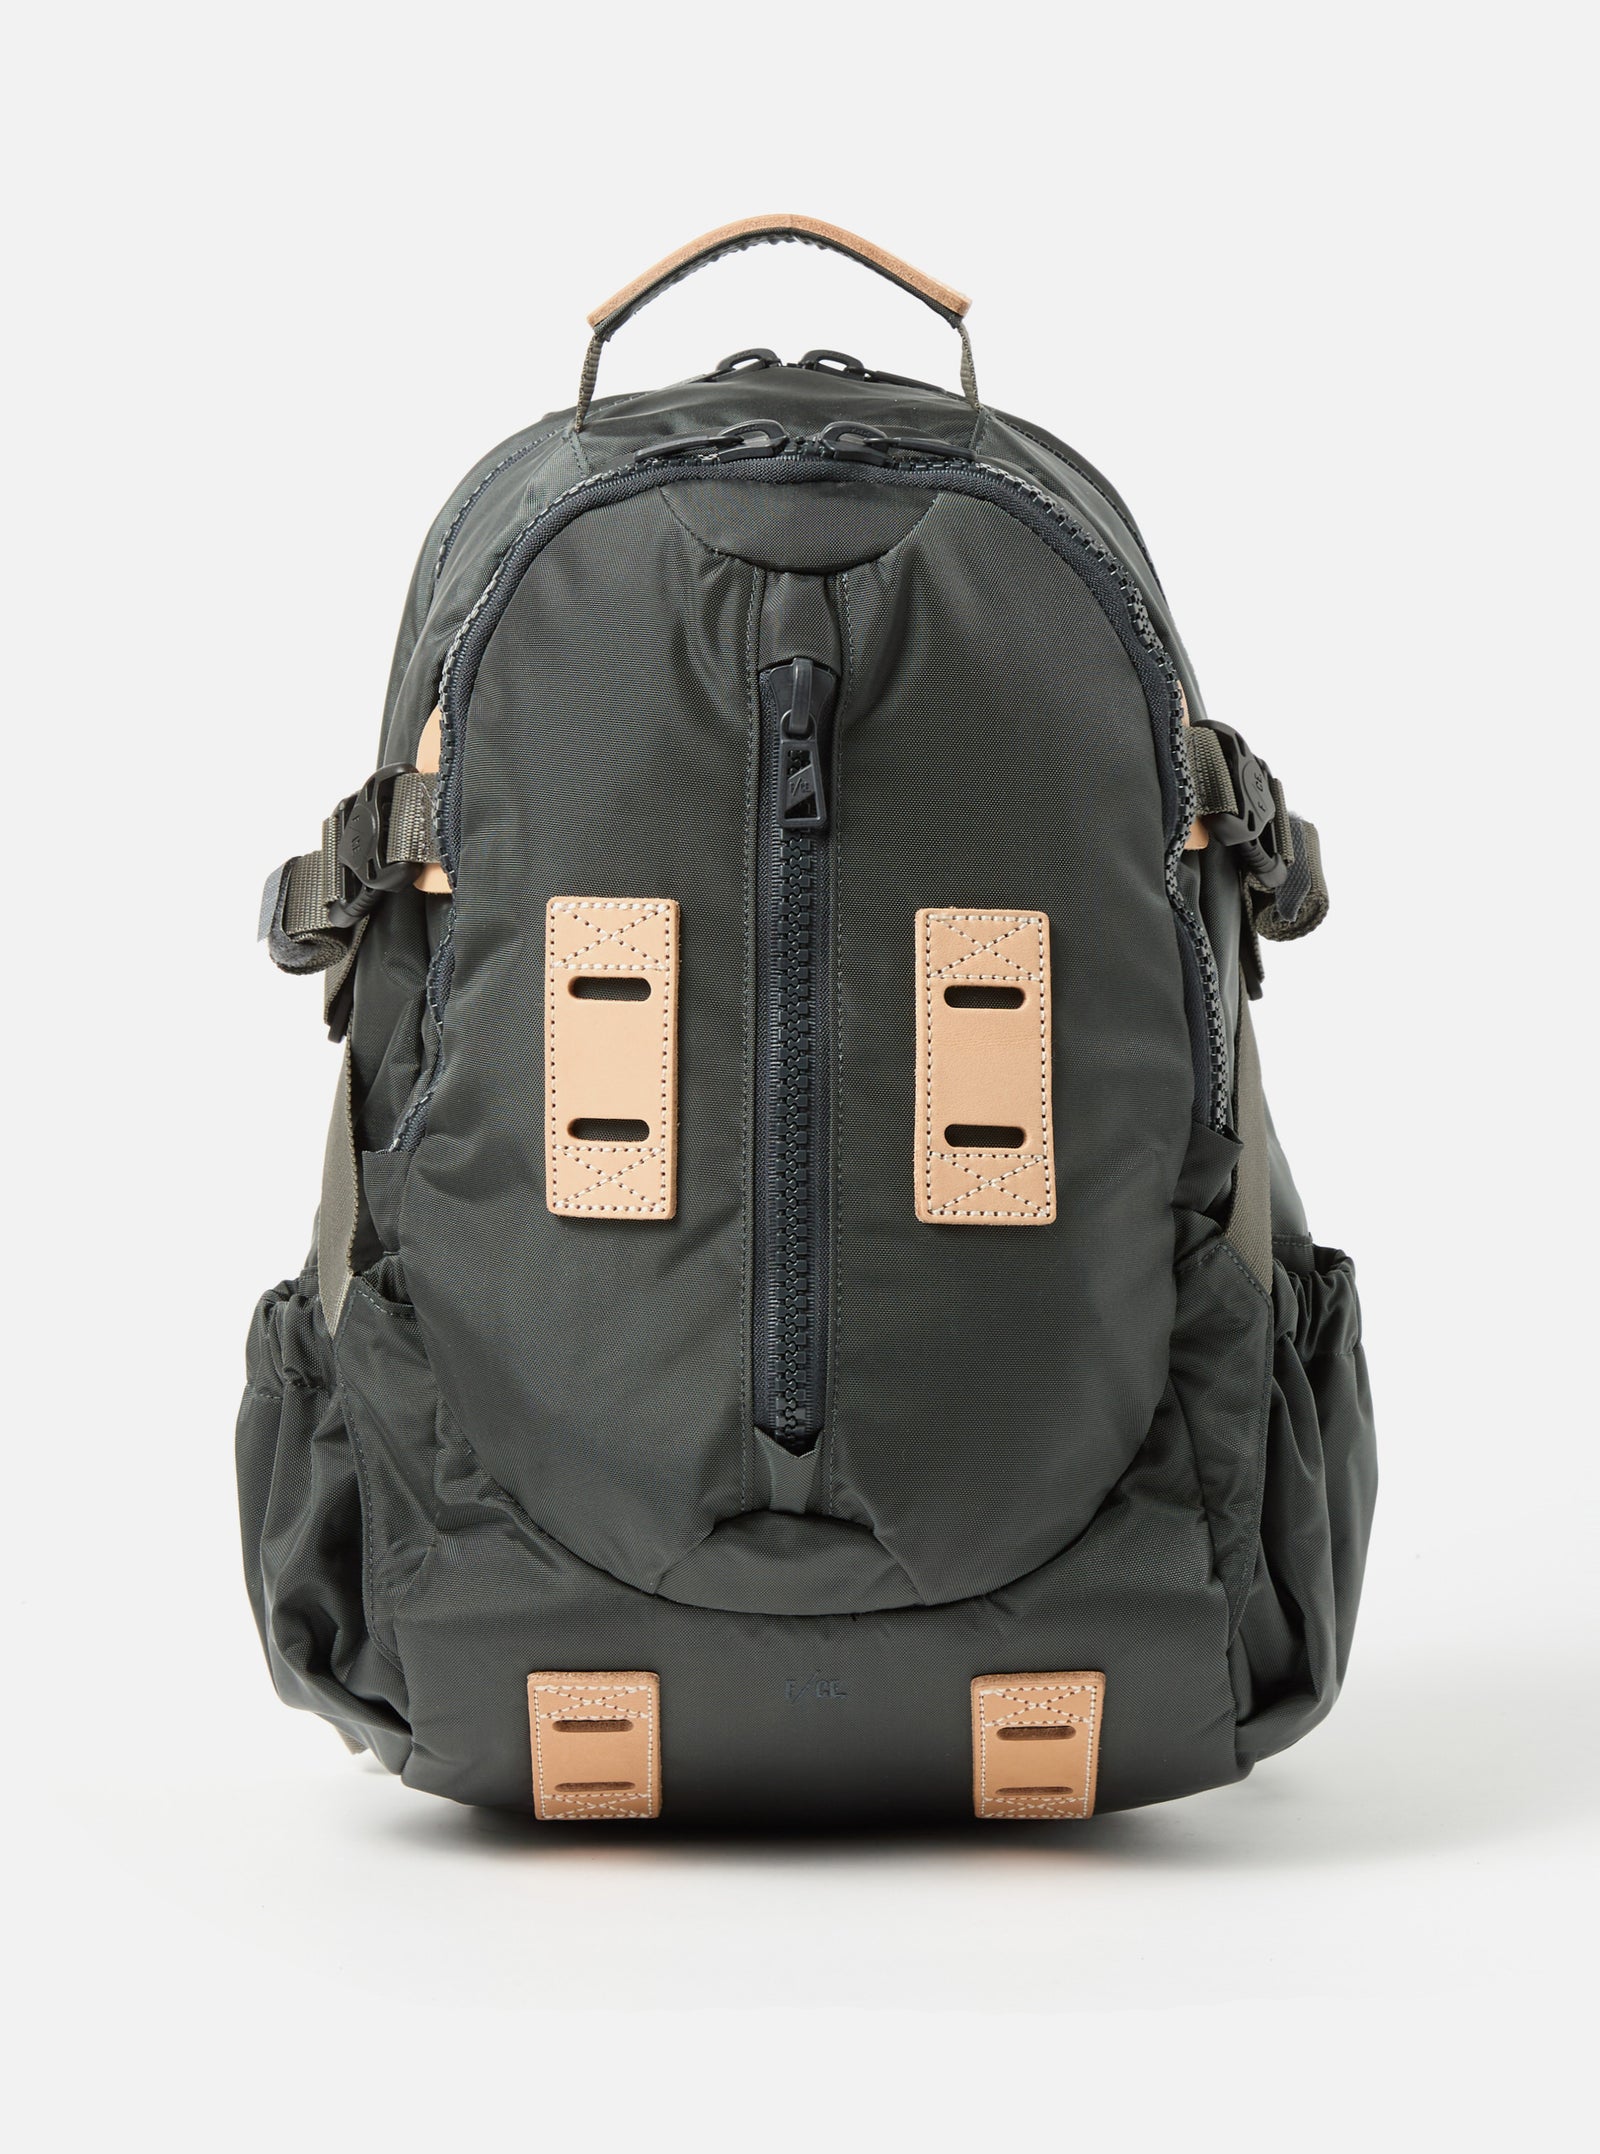 F/CE.® 950 Travel Backpack S in Grey Cordura®